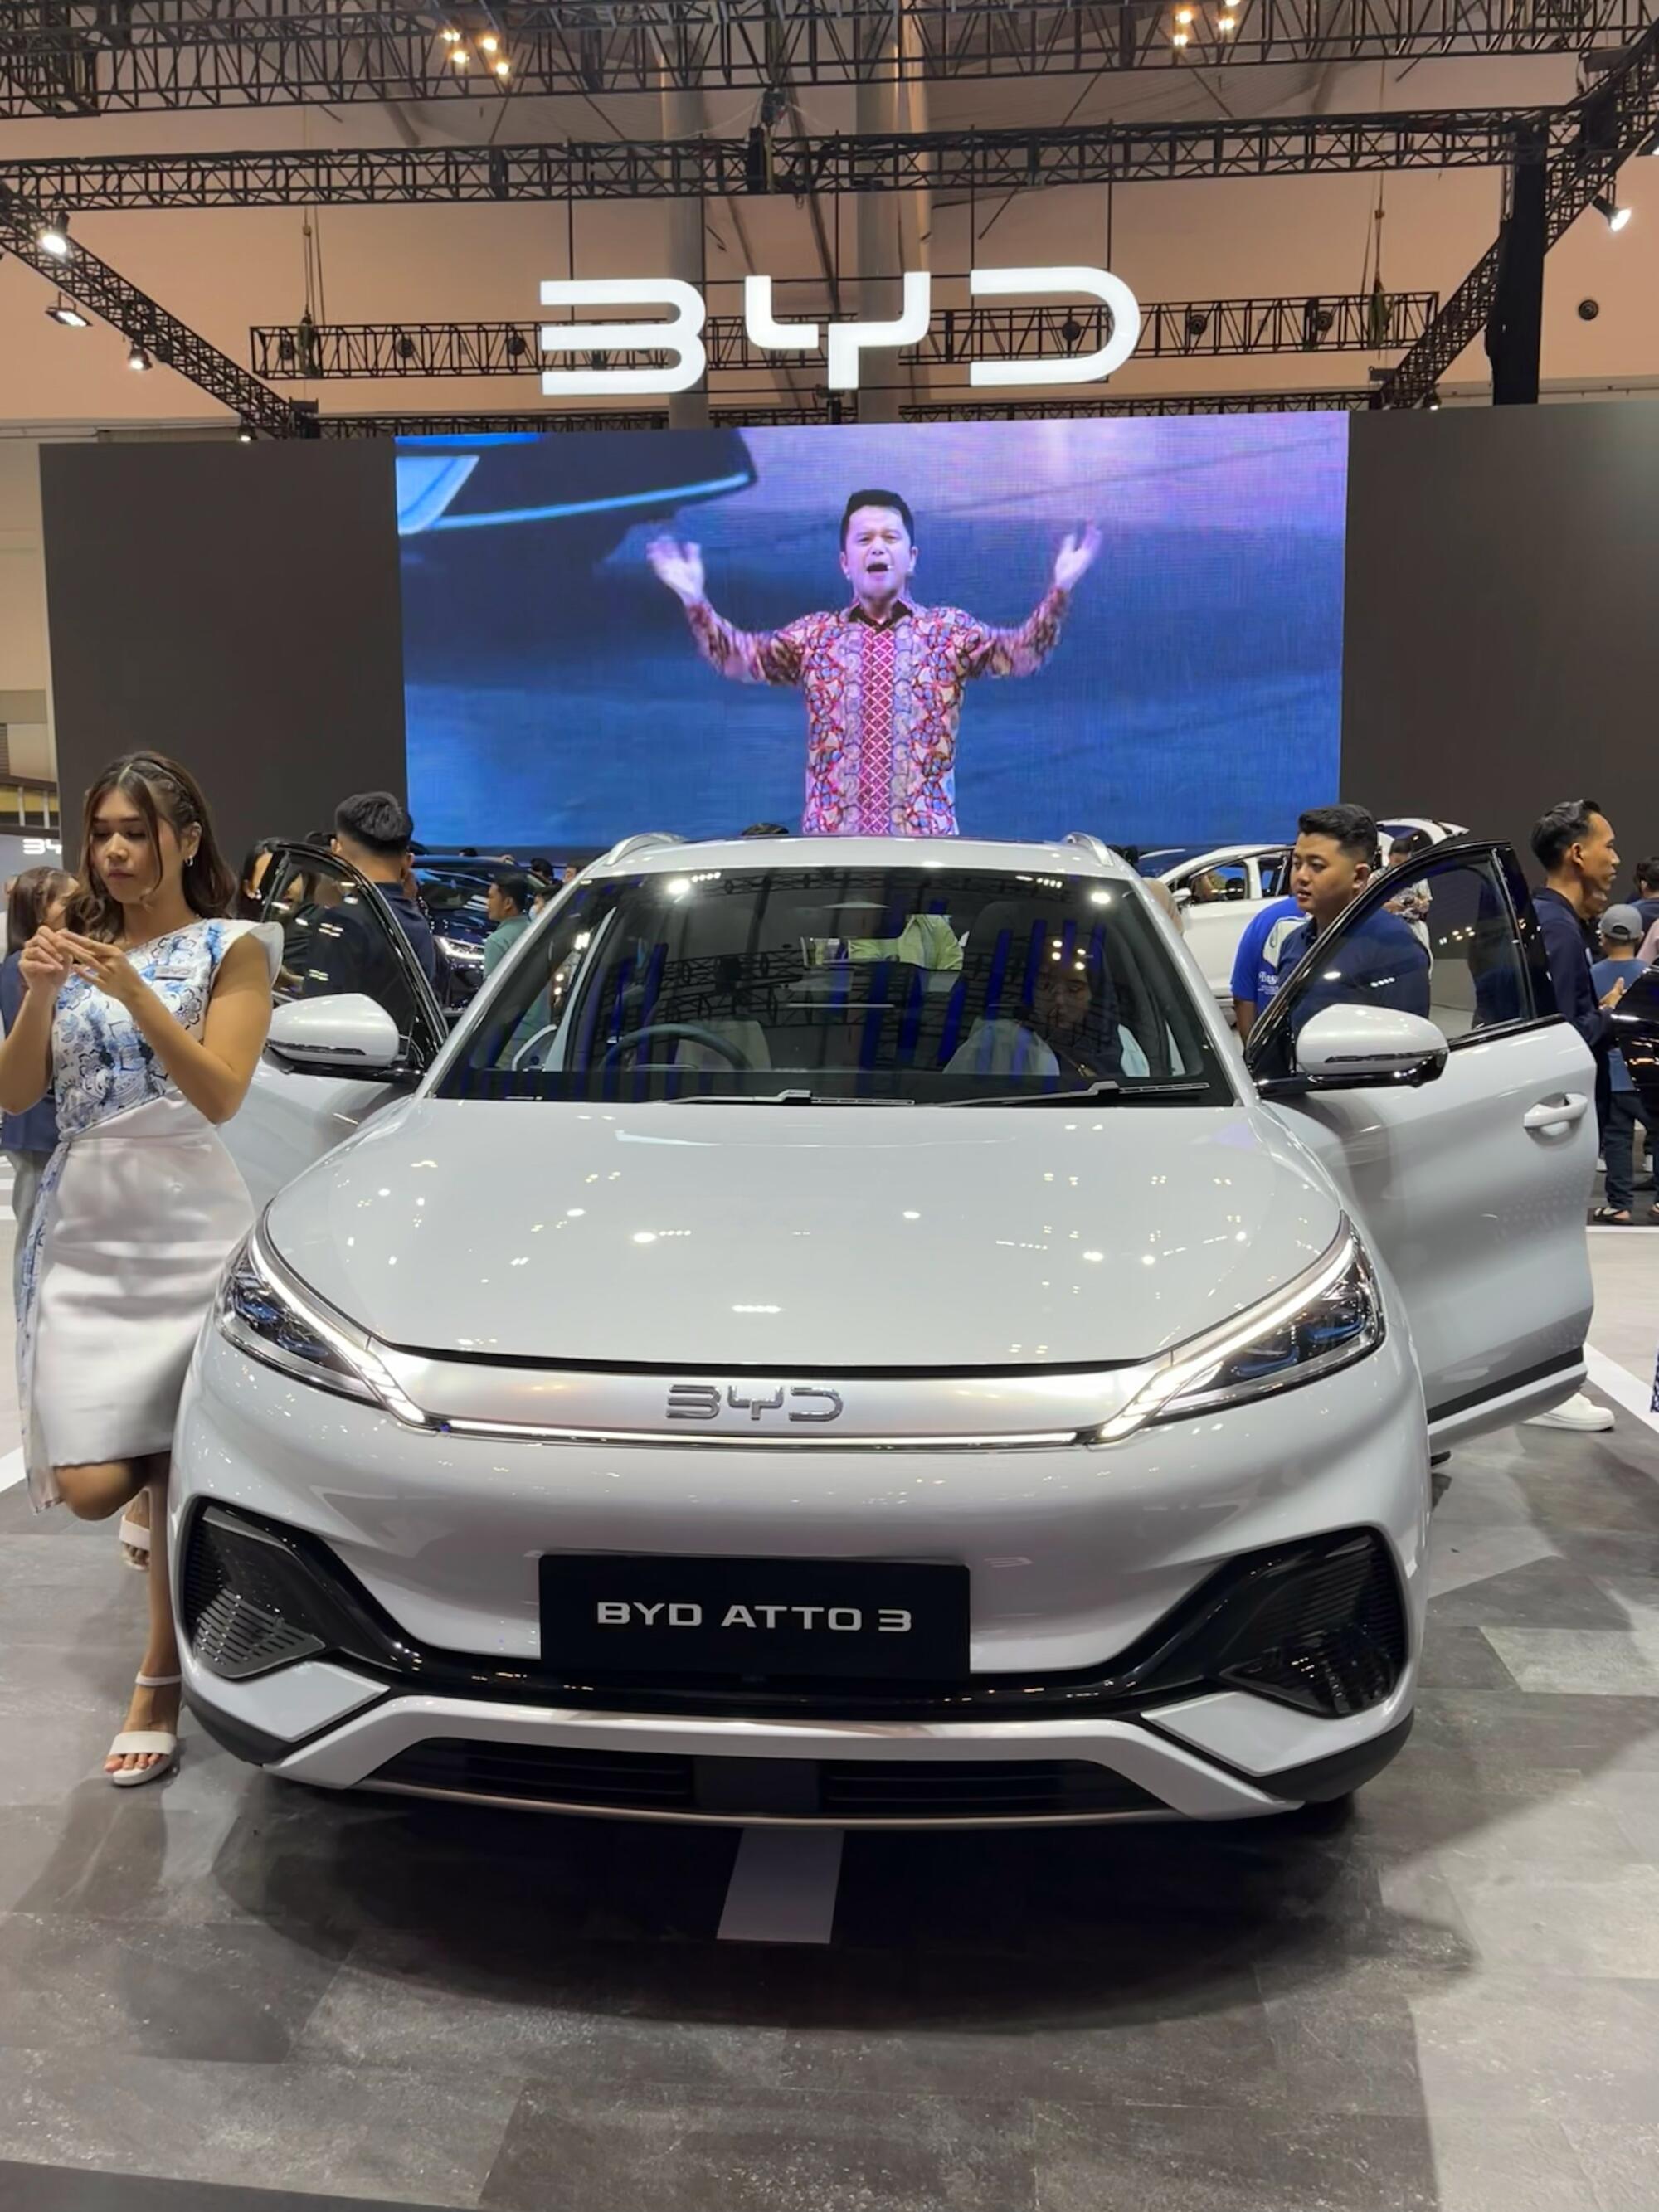 A BYD car on display with its front doors open at an auto expo